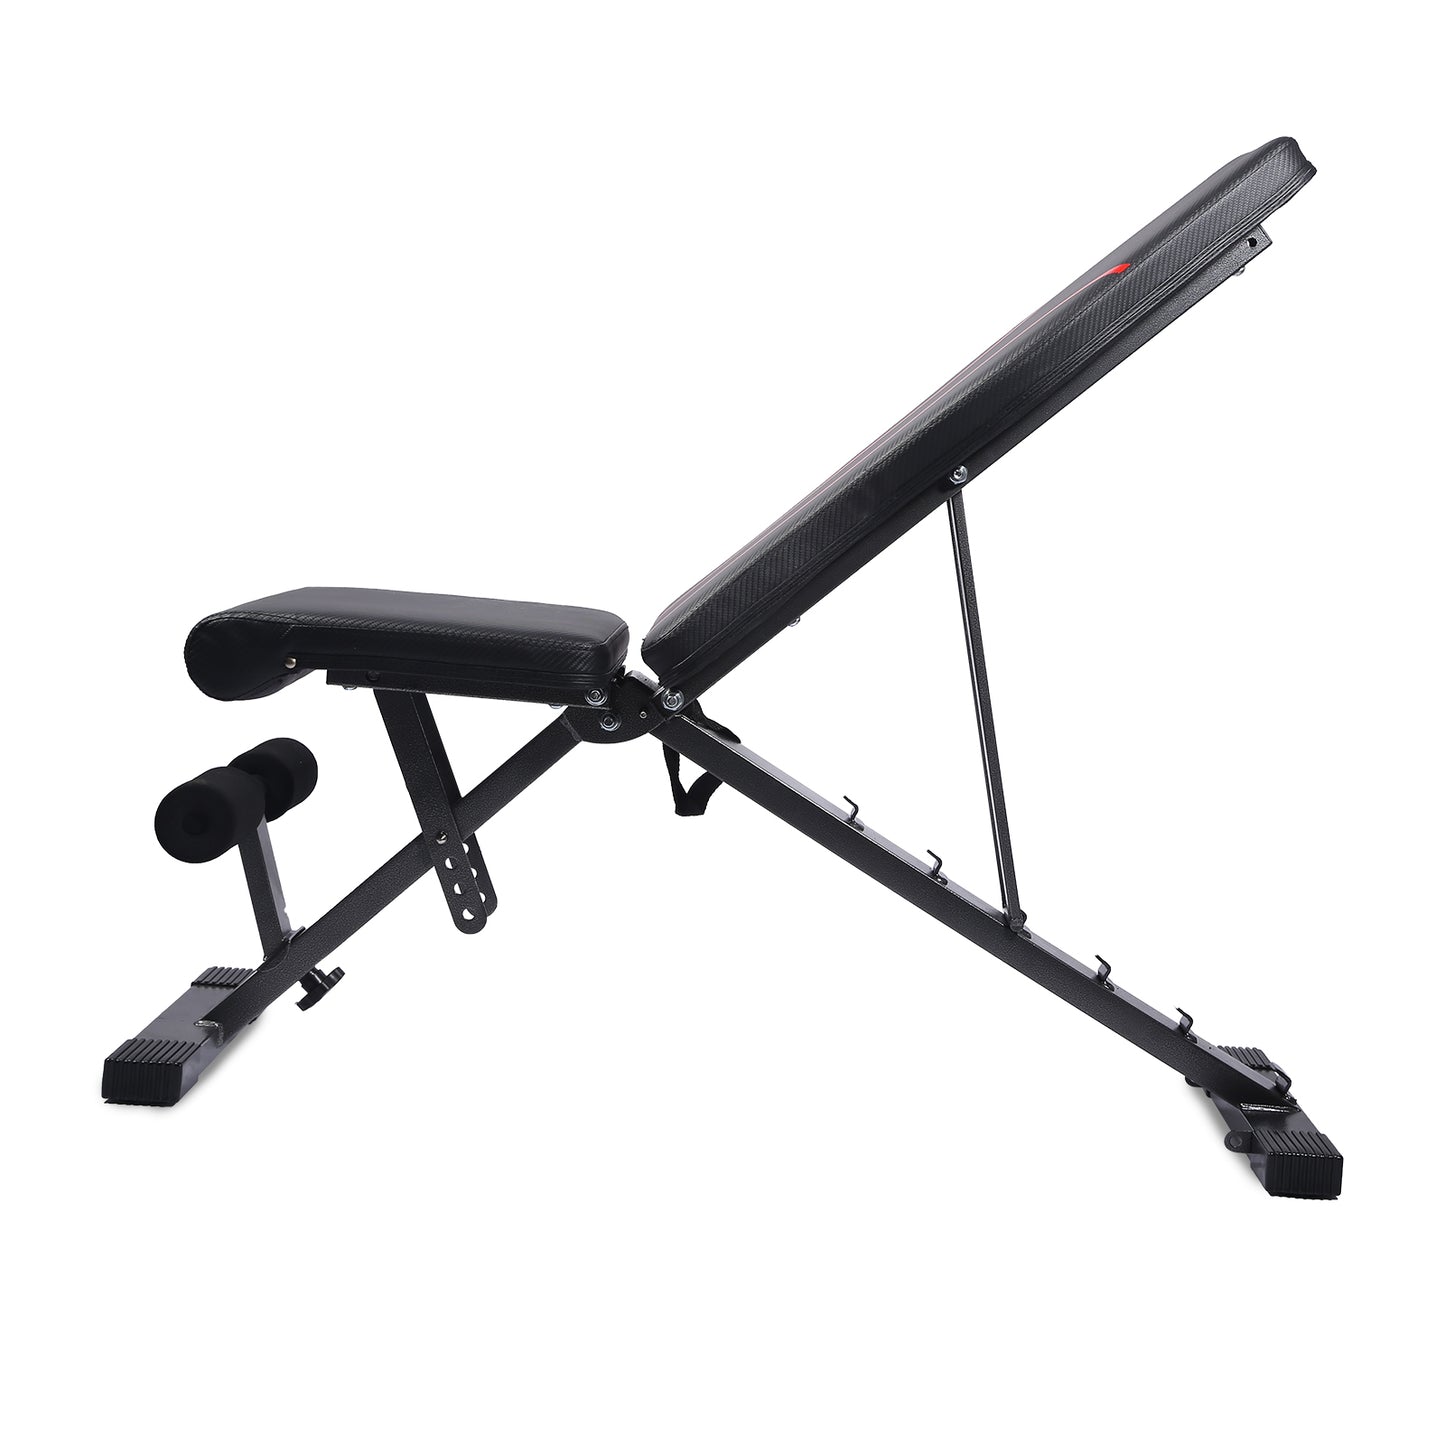 Training Weight Bench, Adjustable Strength Training Bench for Full Body Workout